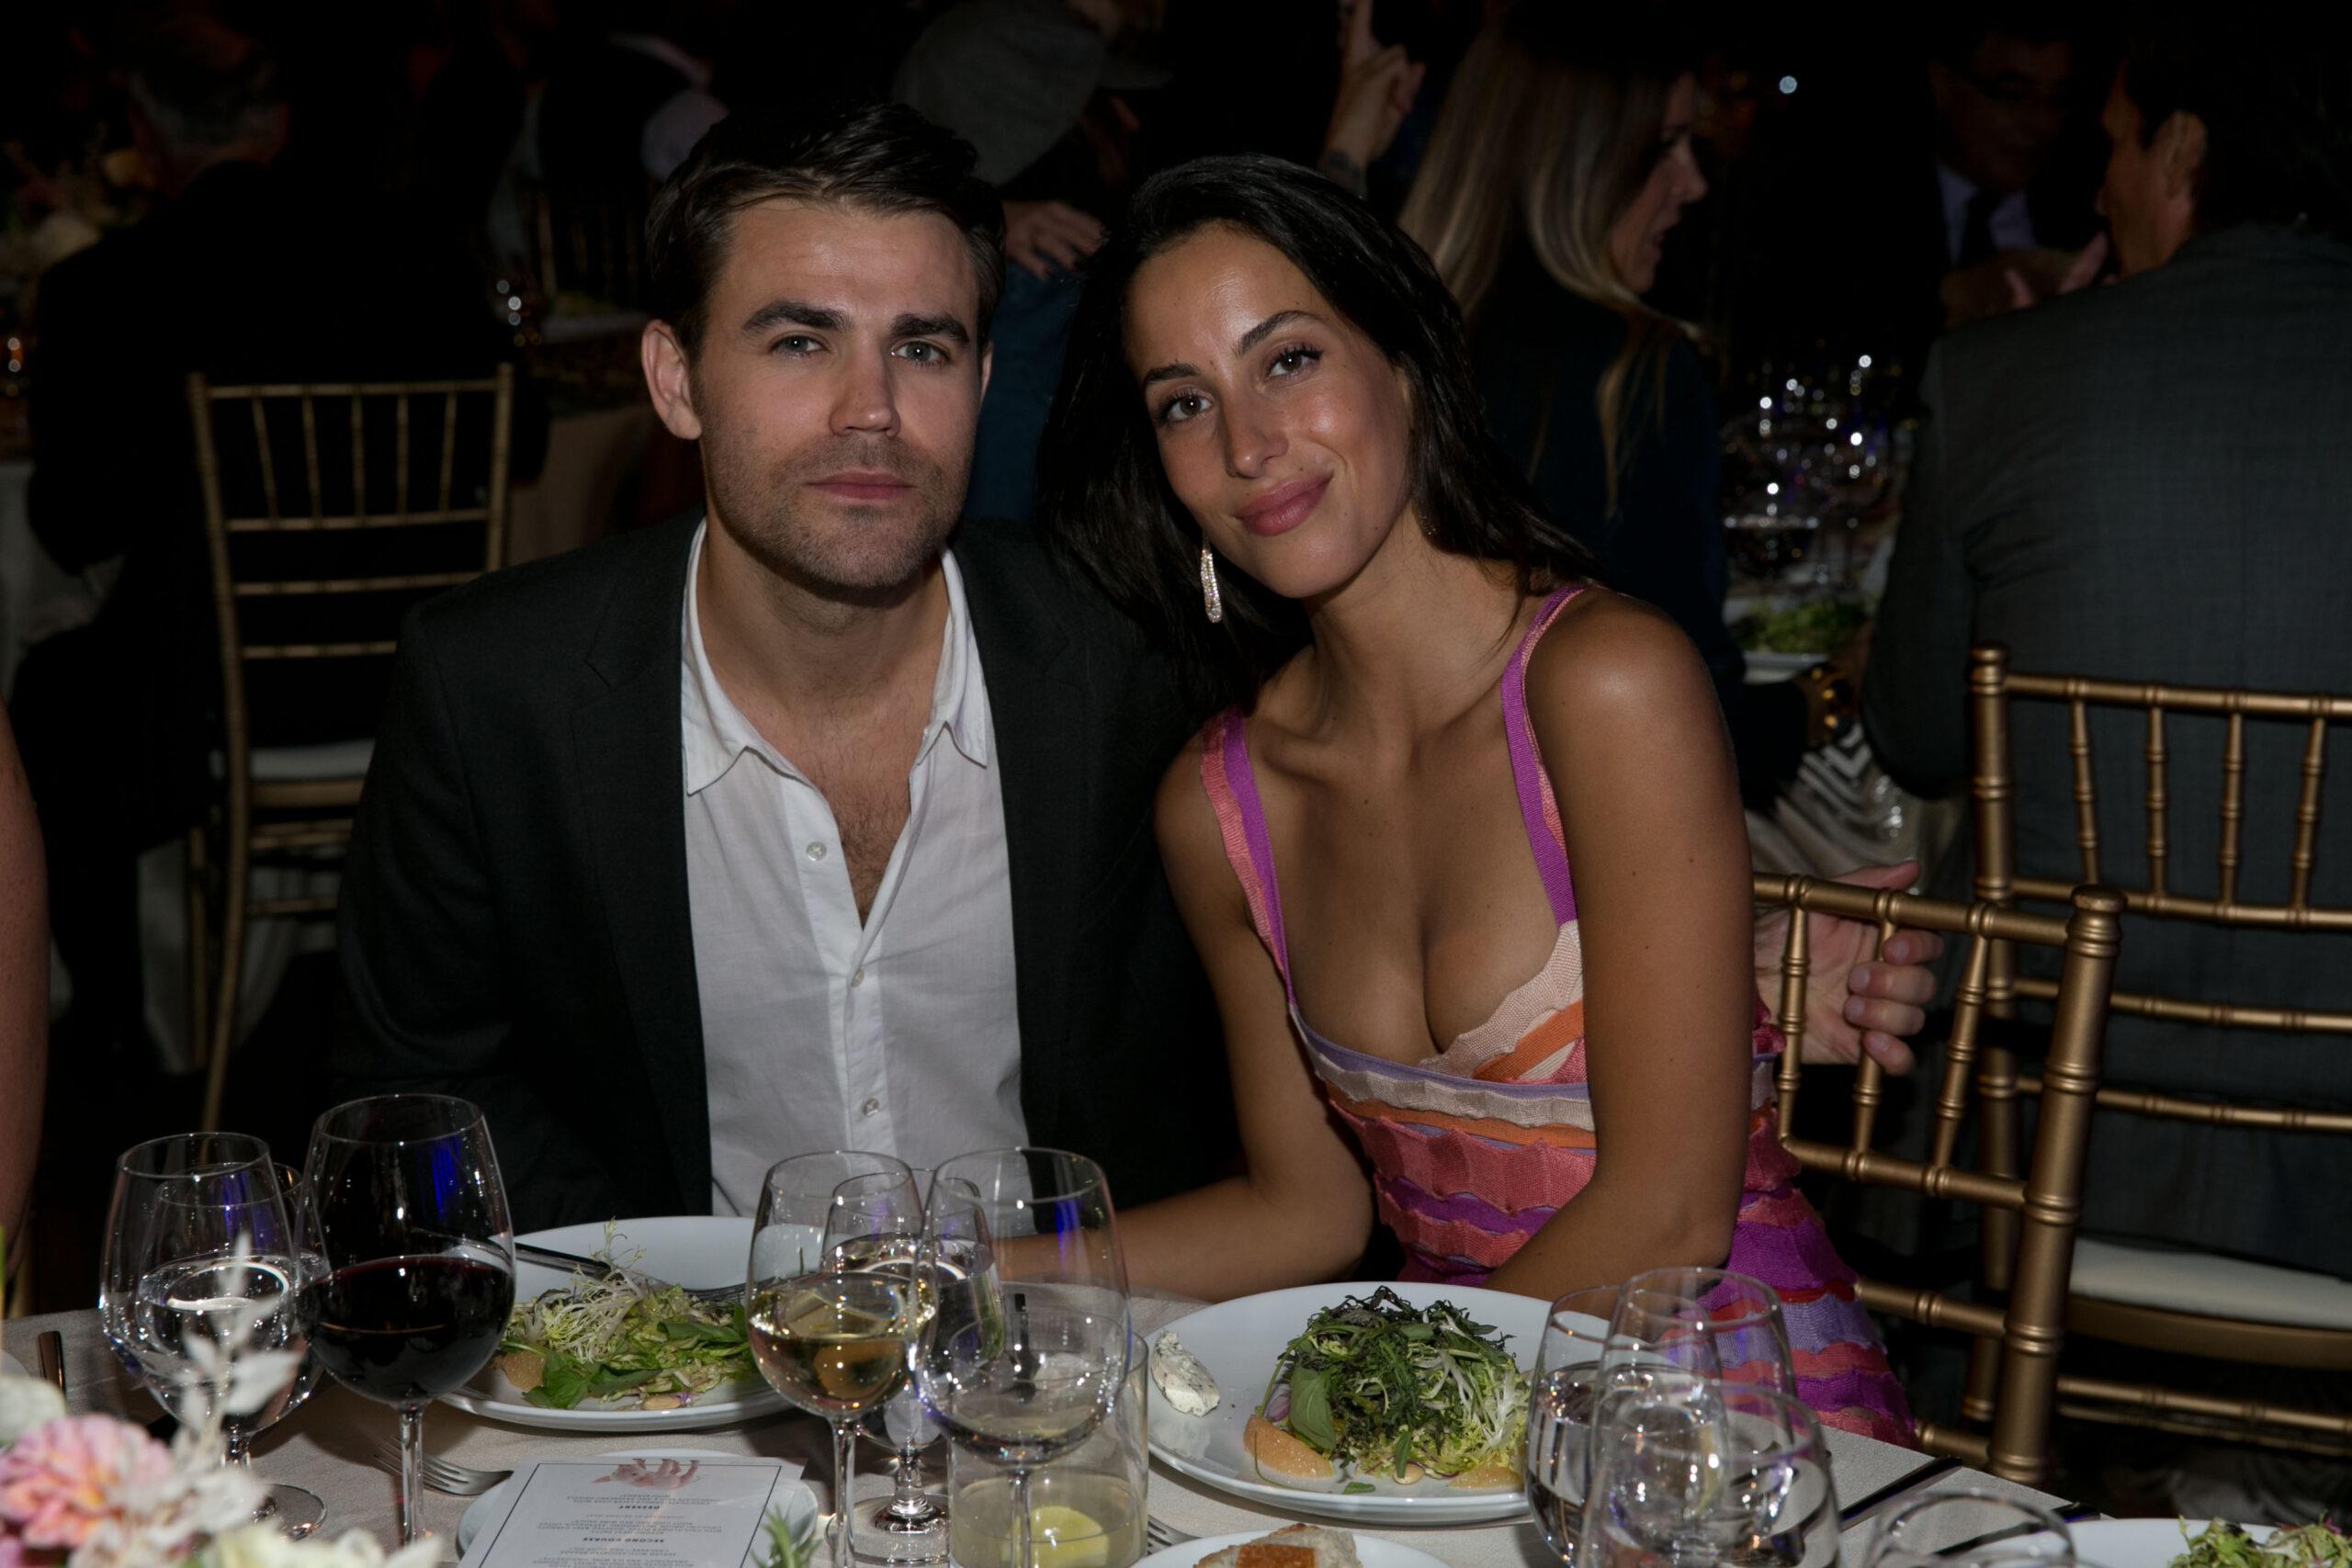 Mercy For Animals Celebrates its 20th Anniversary at their Annual Hidden Heroes Gala at The Shrine Auditorium in Downtown Los Angeles. 14 Sep 2019 Pictured: Paul Wesley and Ines De Ramon. Photo credit: Rupert Thorpe/Mega TheMegaAgency.com +1 888 505 6342 (Mega Agency TagID: MEGA504138_013.jpg) [Photo via Mega Agency]